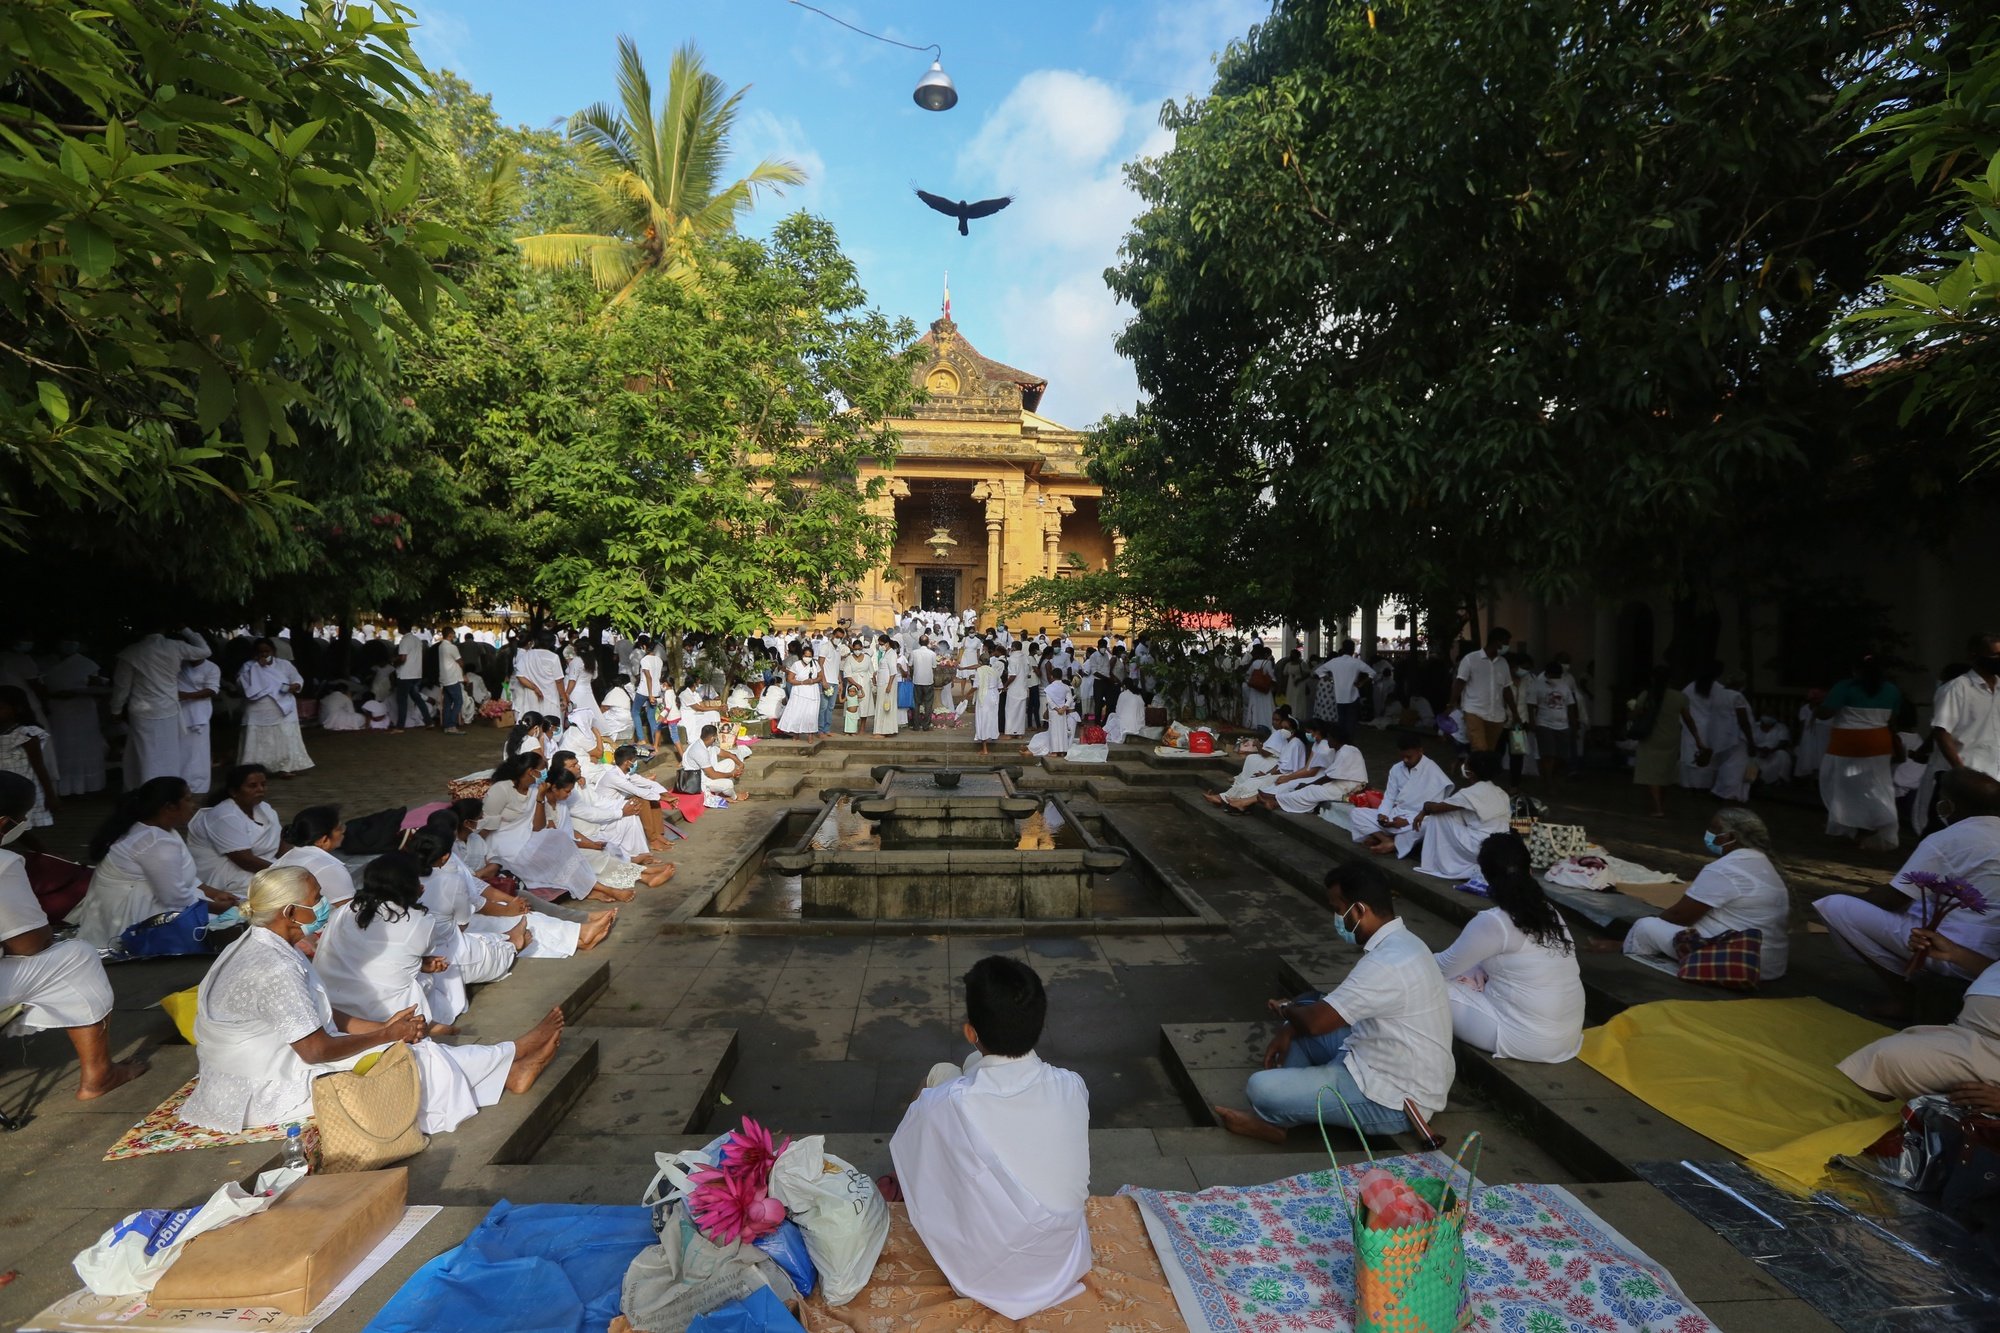 epa09948117 Sri Lankan Buddhist devotees take part in a religious observance on the Vesak full moon day at a temple in the Kelaniya suburb of Colombo, Sri Lanka, 15 May 2022. Vesak is the full moon day of the month of May and is the most sacred day for Buddhists in Sri Lanka and around the world. Buddhists commemorate the birth, enlightenment, and death of the Buddha on the full moon day.  EPA/CHAMILA KARUNARATHNE